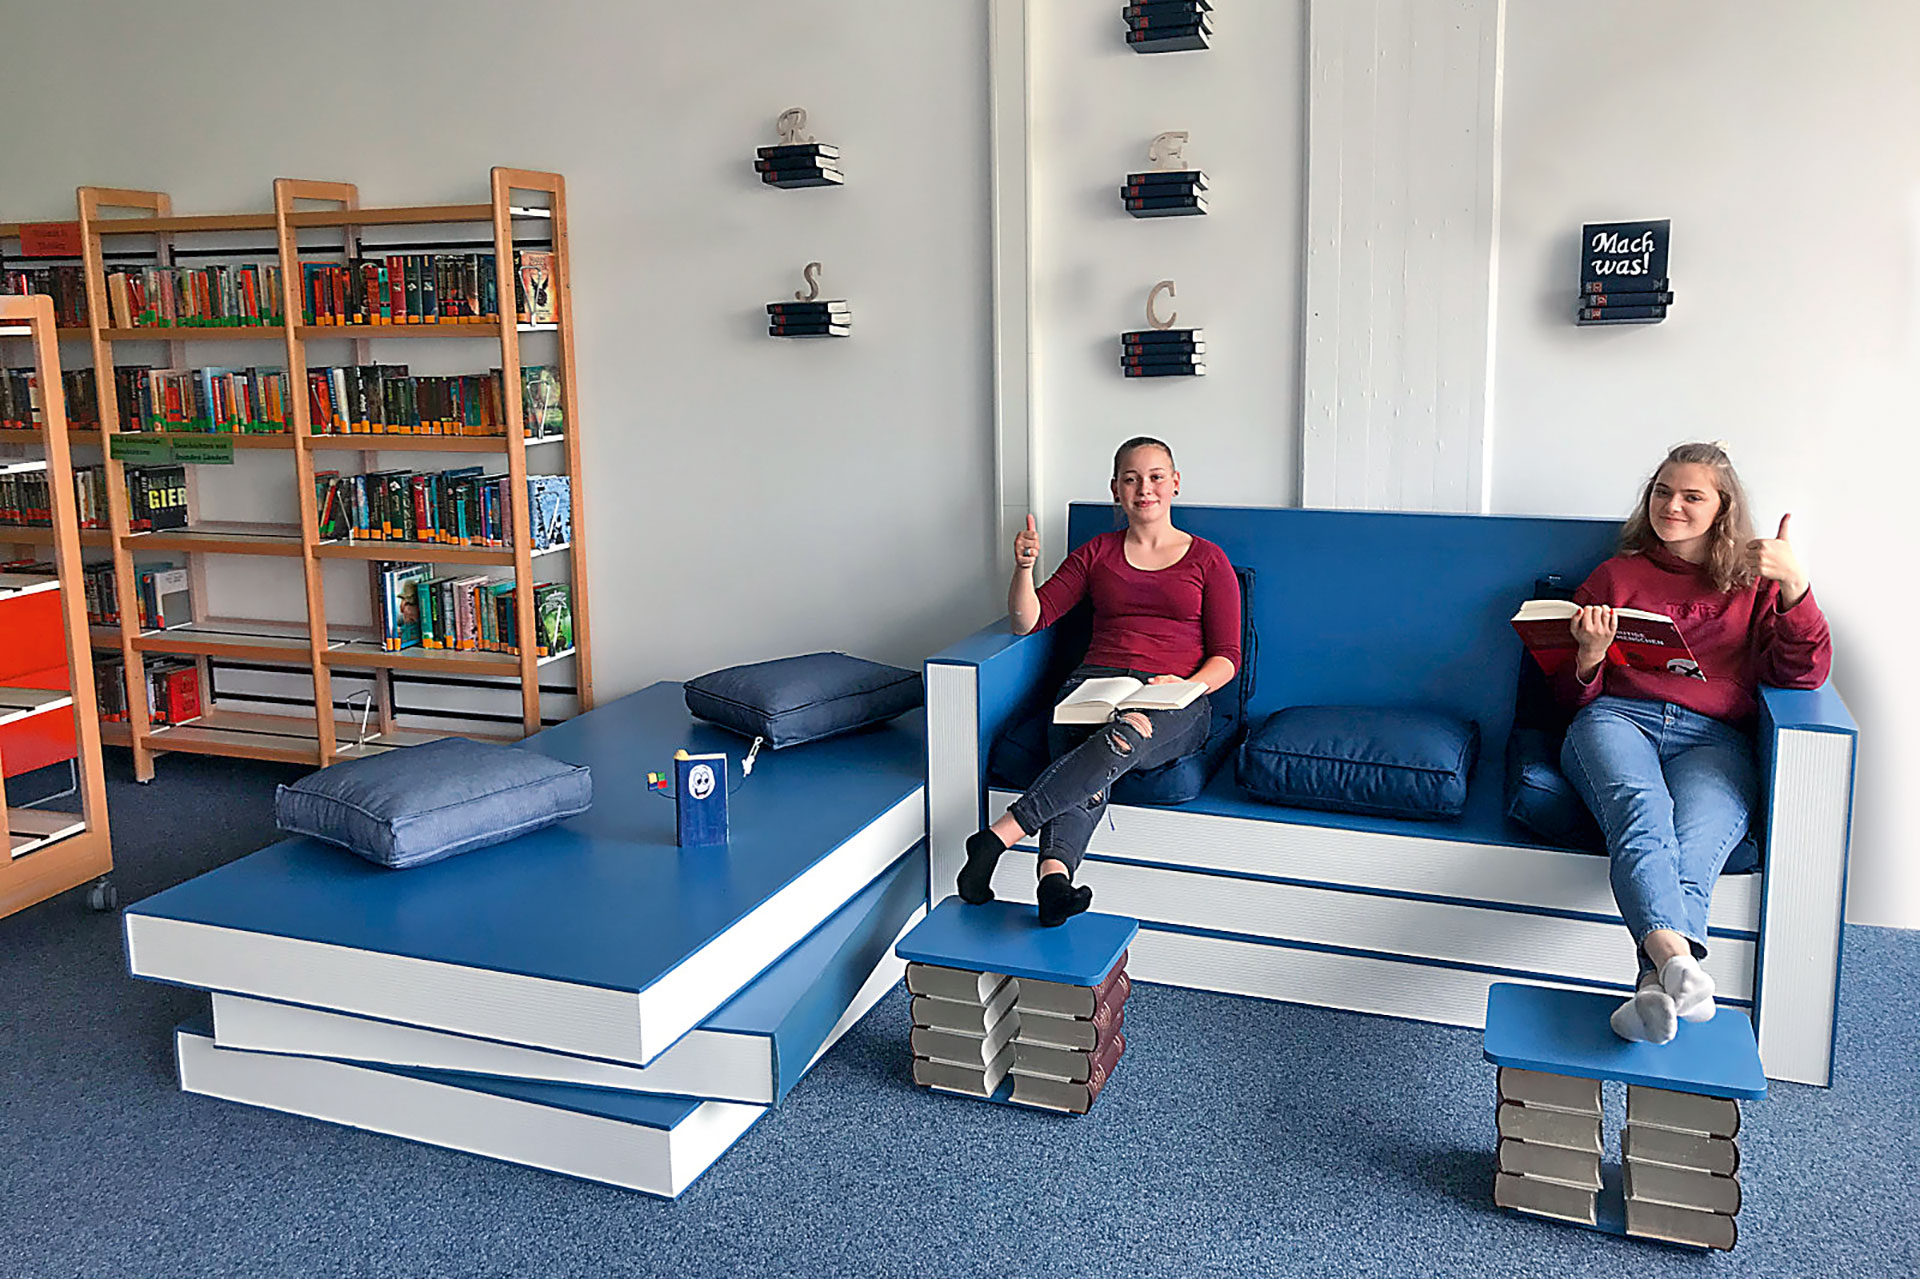 Ninth-grade students from Realschule Neustadt bei Coburg build seating made to look like books for their school library.